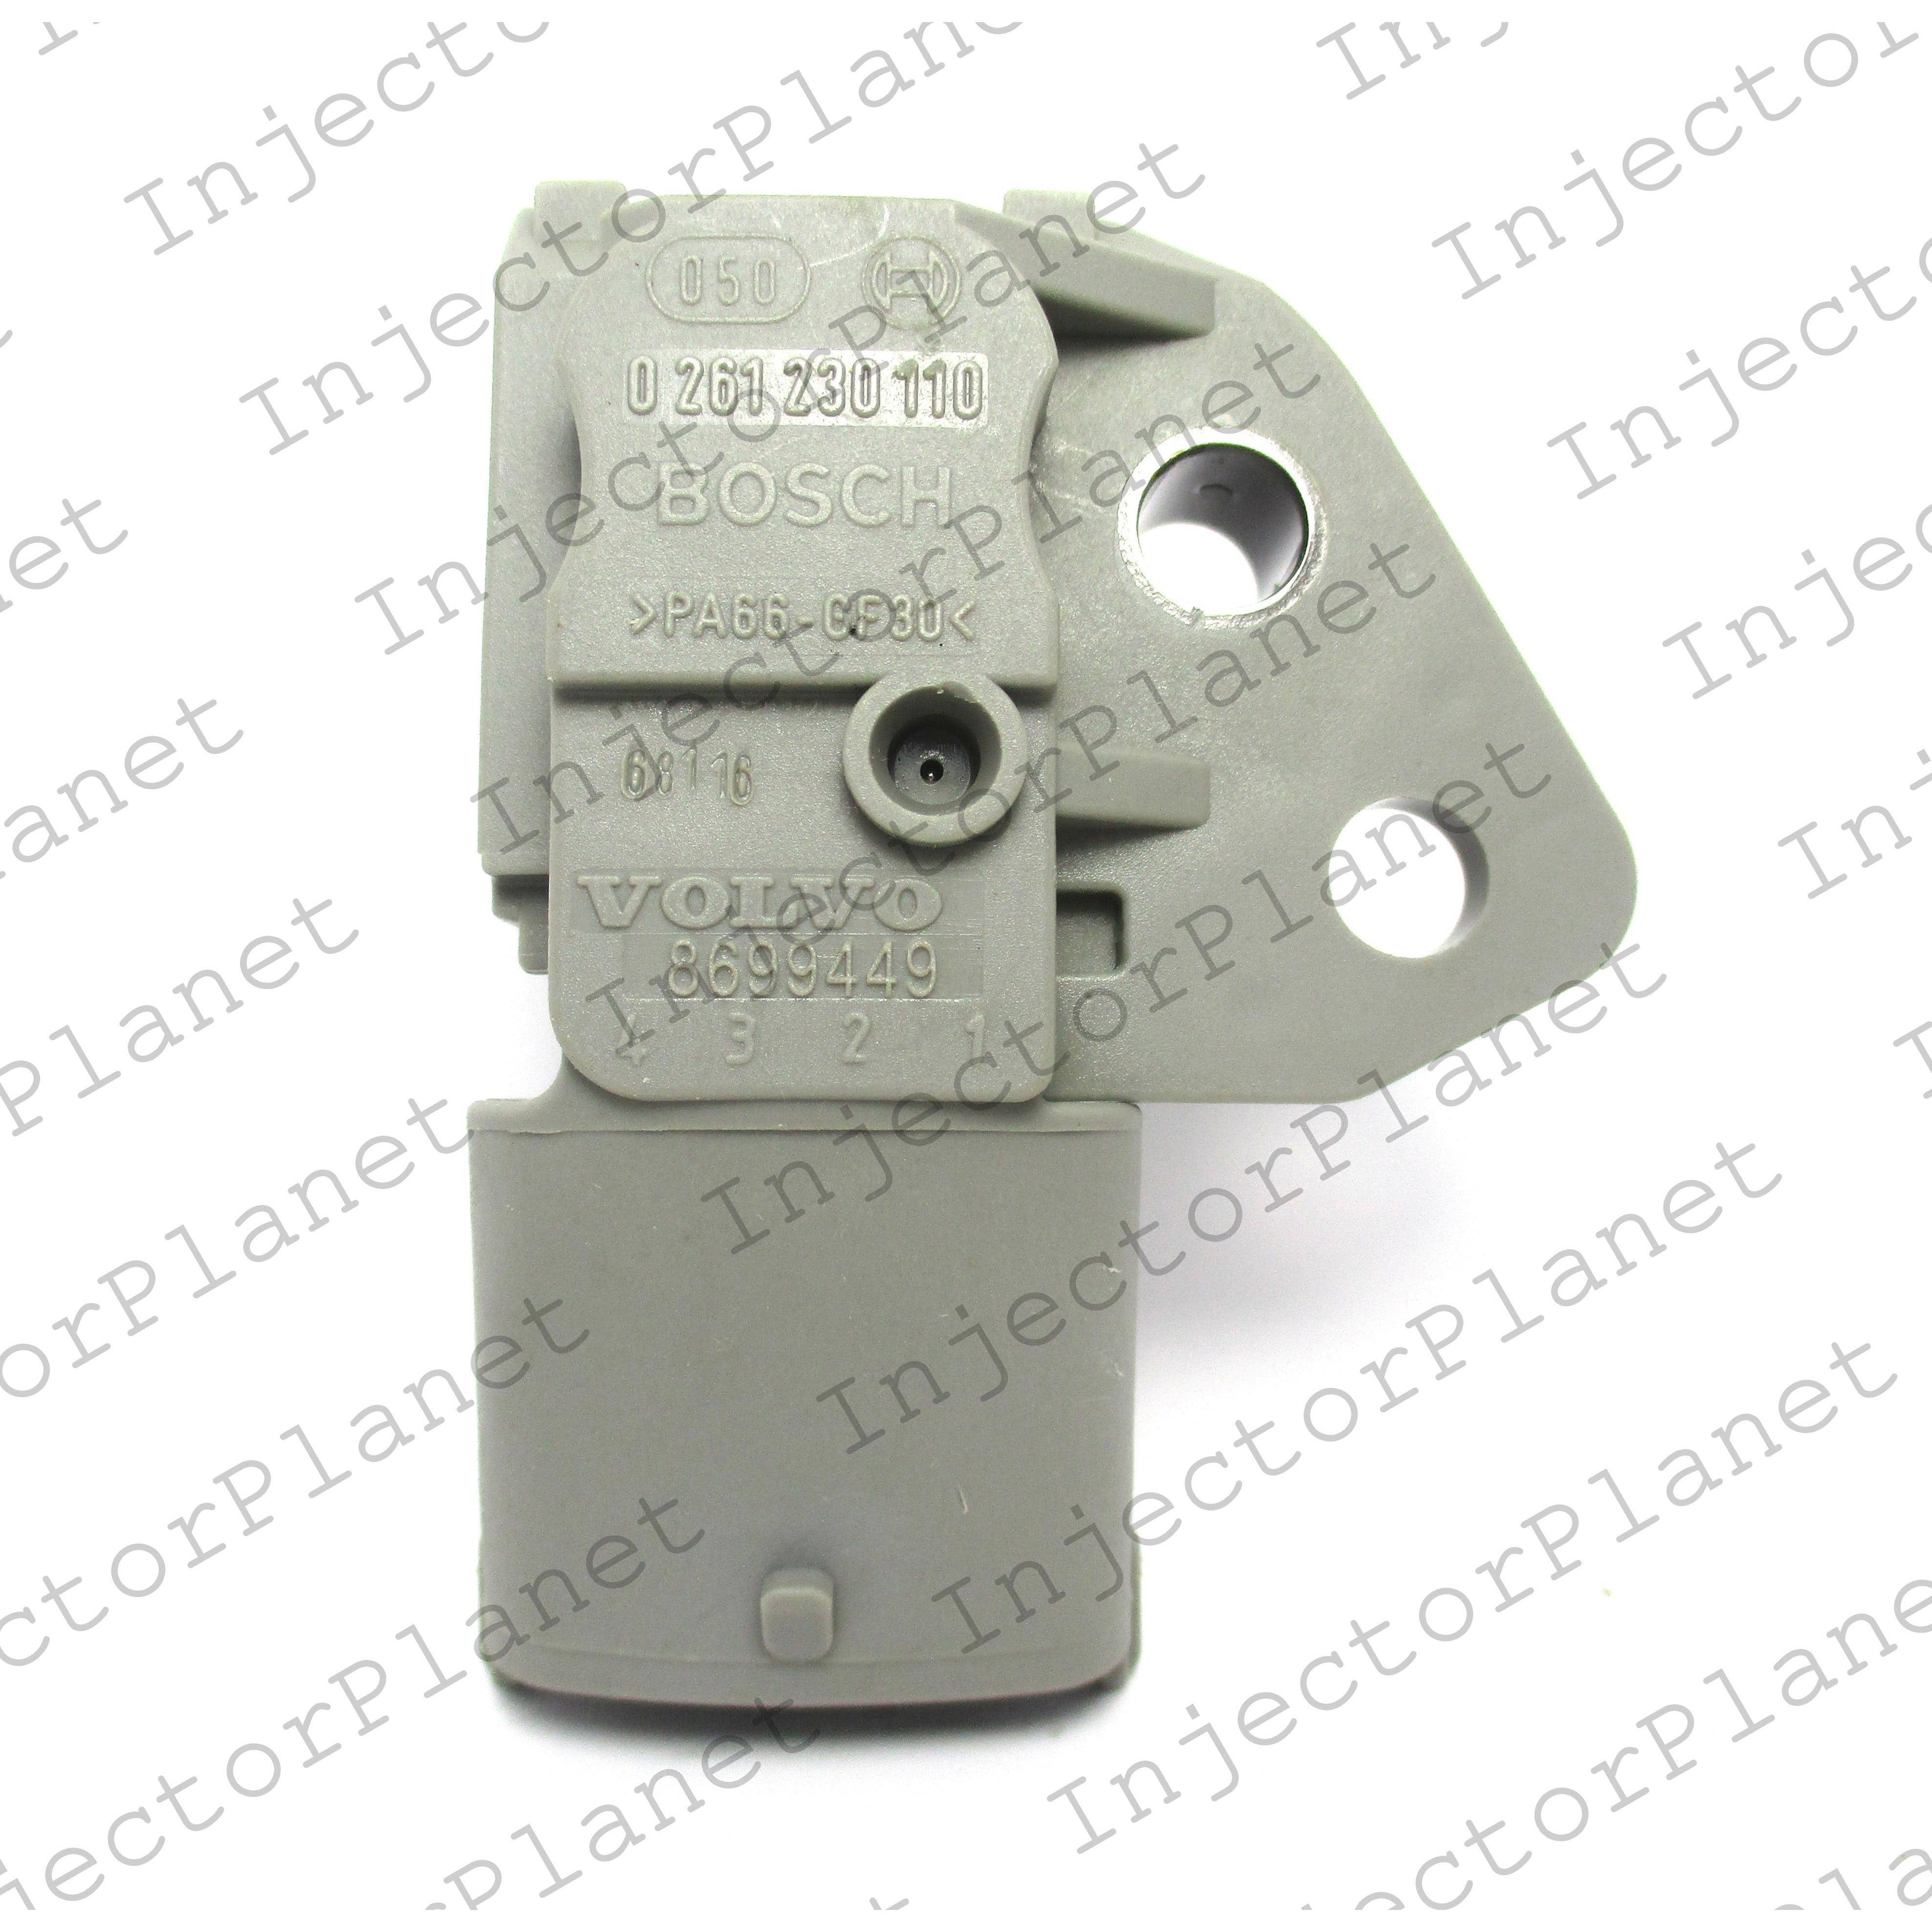 Bosch 0261230110 / Volvo 8699449 | INJECTOR PLANET CORP.